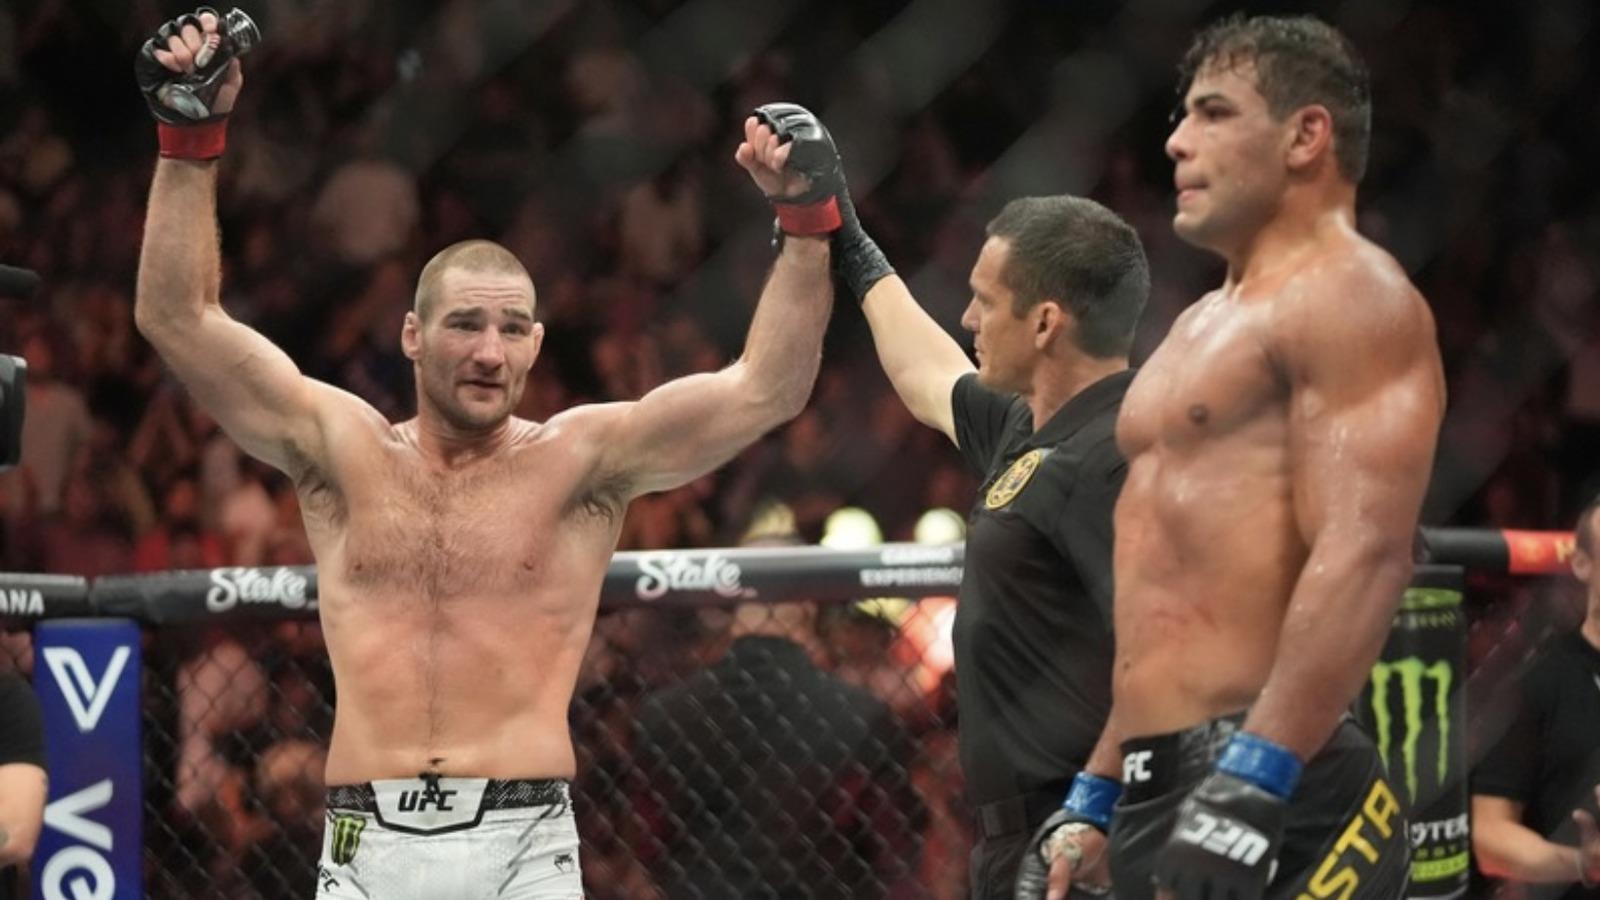 Sean Strickland emerged victorious at UFC 302, but he won’t be satisfied until the middleweight belt is around his waist again.